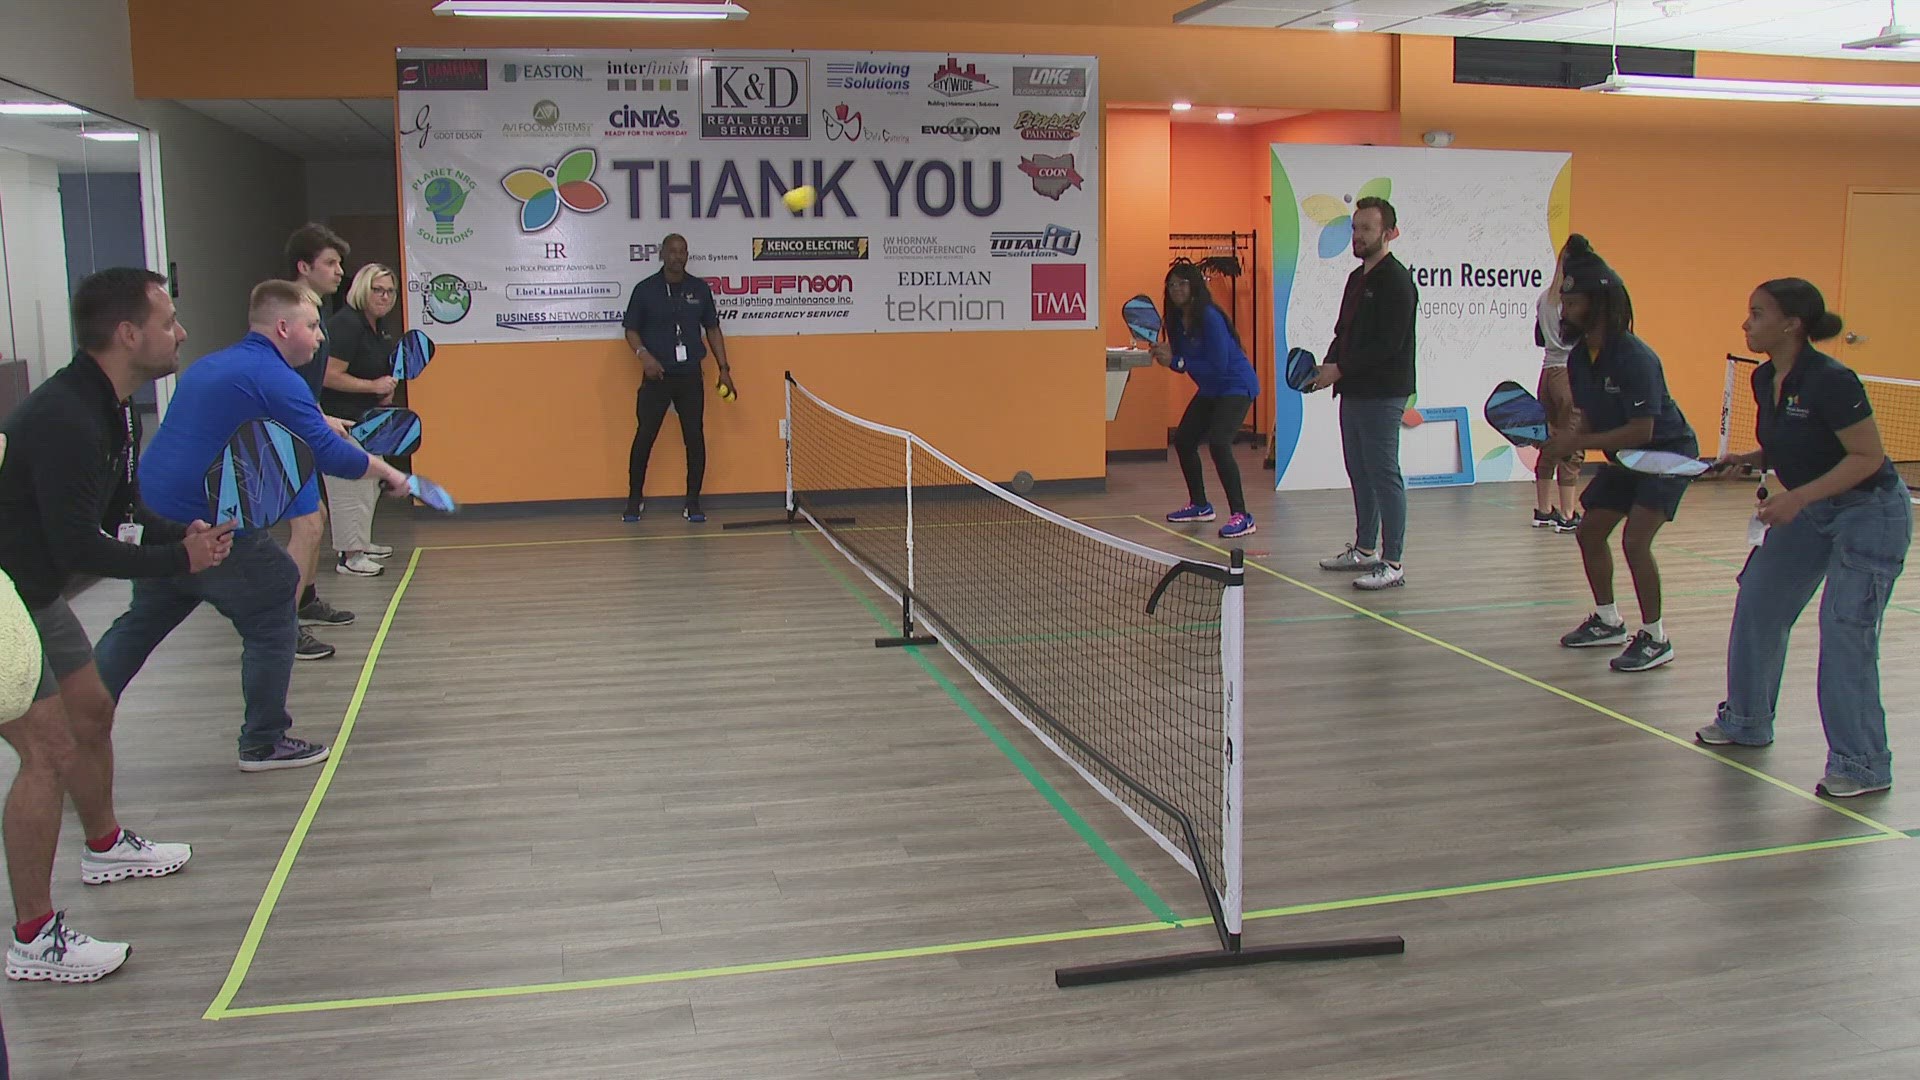 Have you played pickleball yet? The sport is booming especially among those over the age of 65.